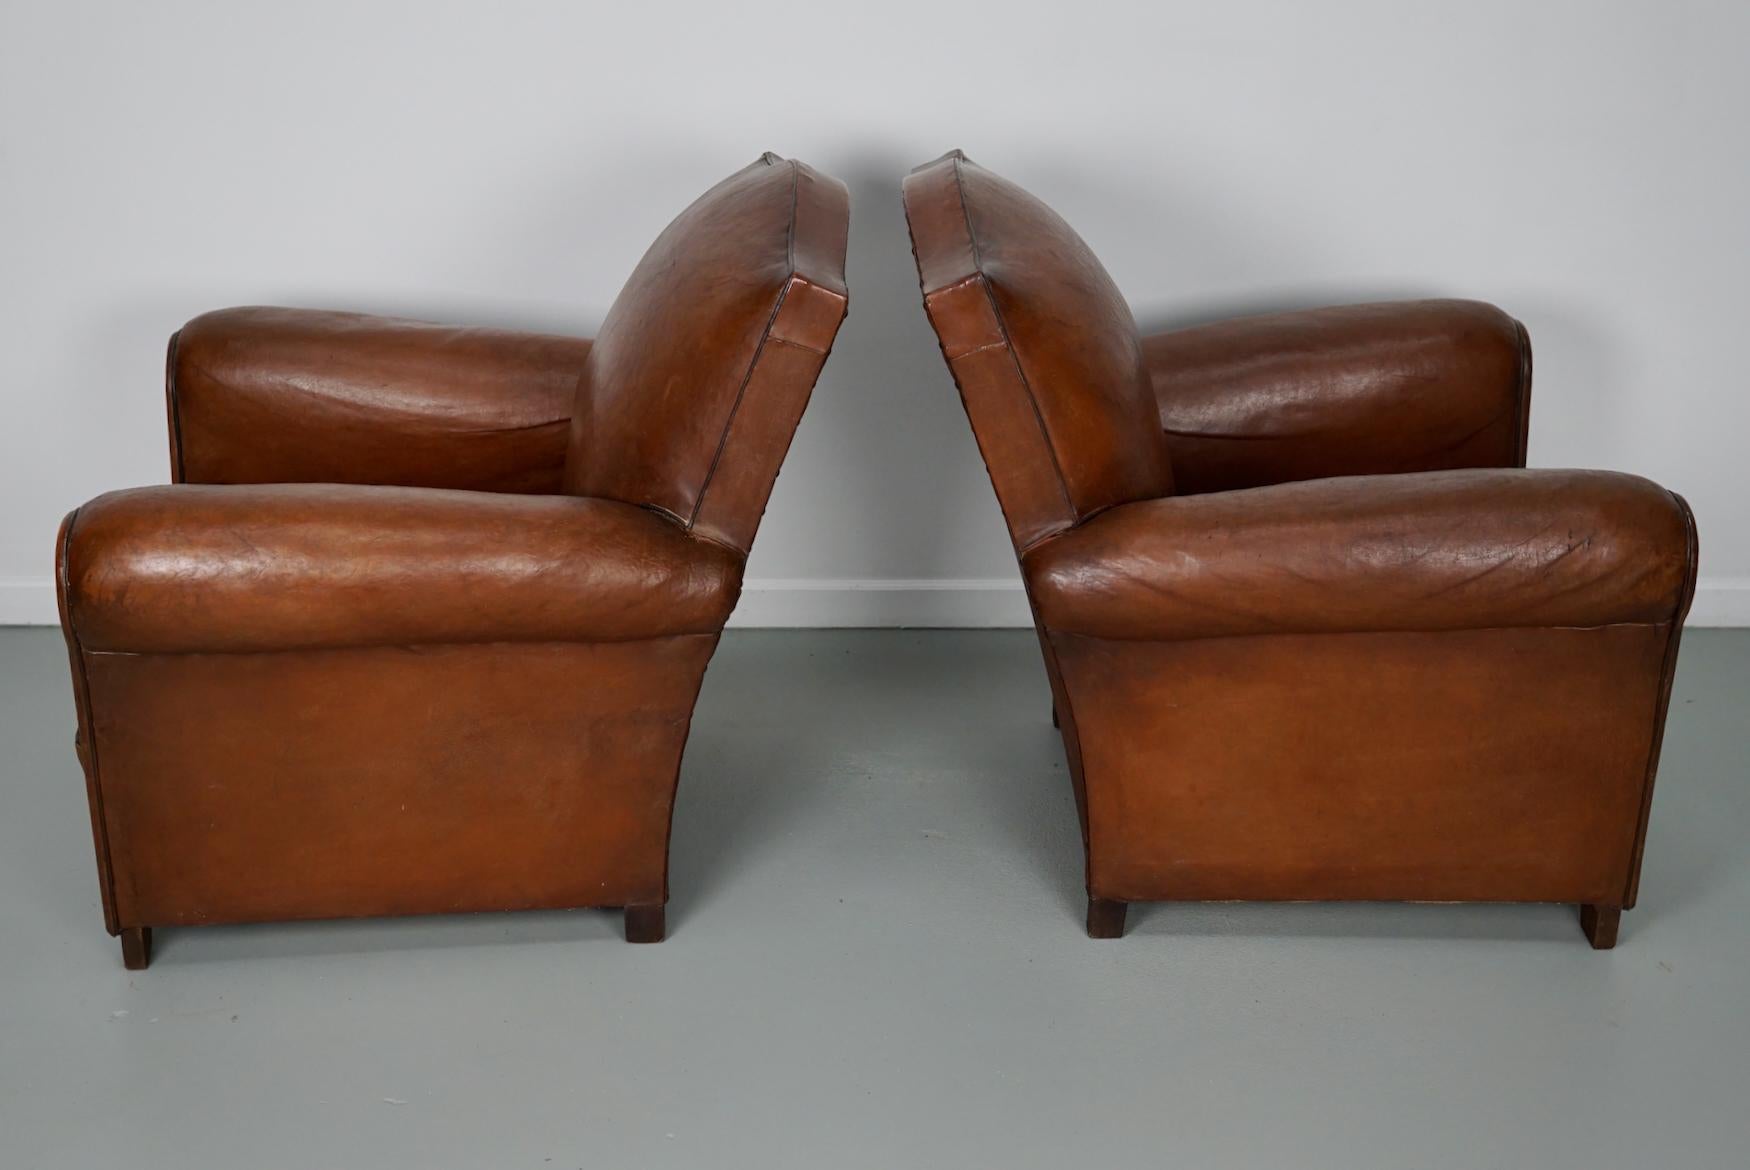 Pair of French Cognac Moustache Back Leather Club Chairs, 1940s For Sale 8